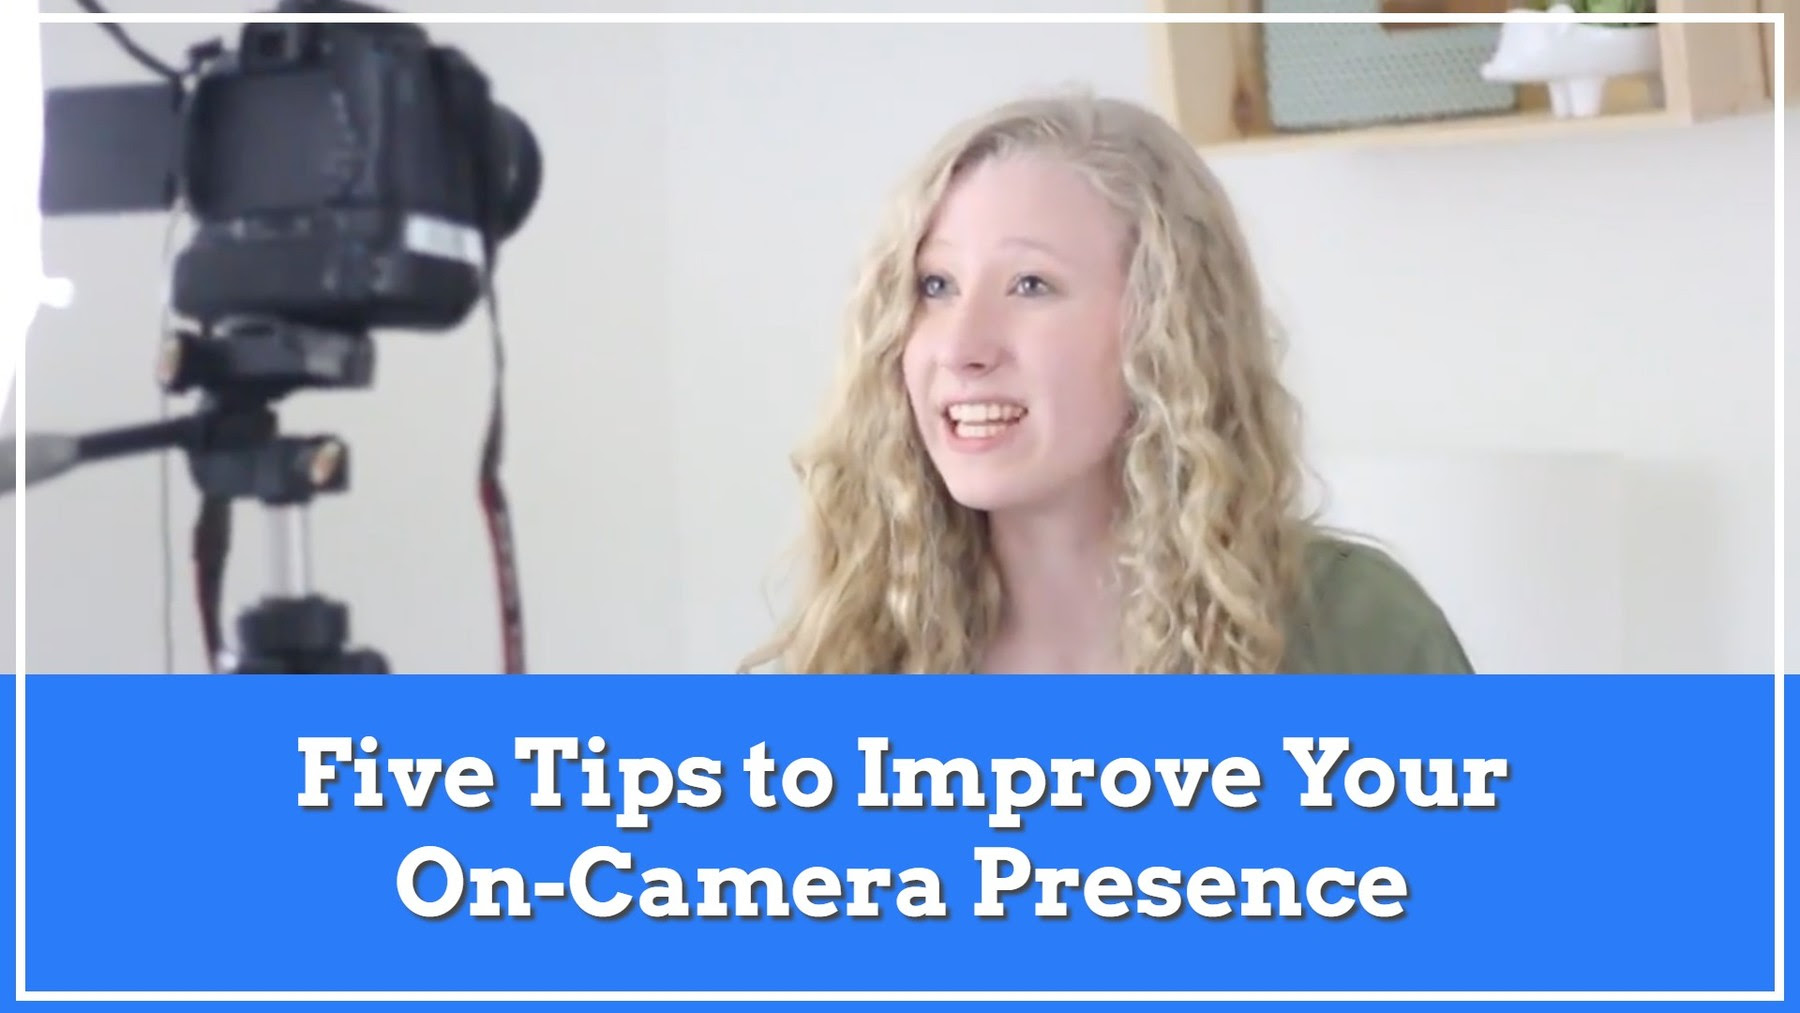 Watch the video on how to improve your on camera presence